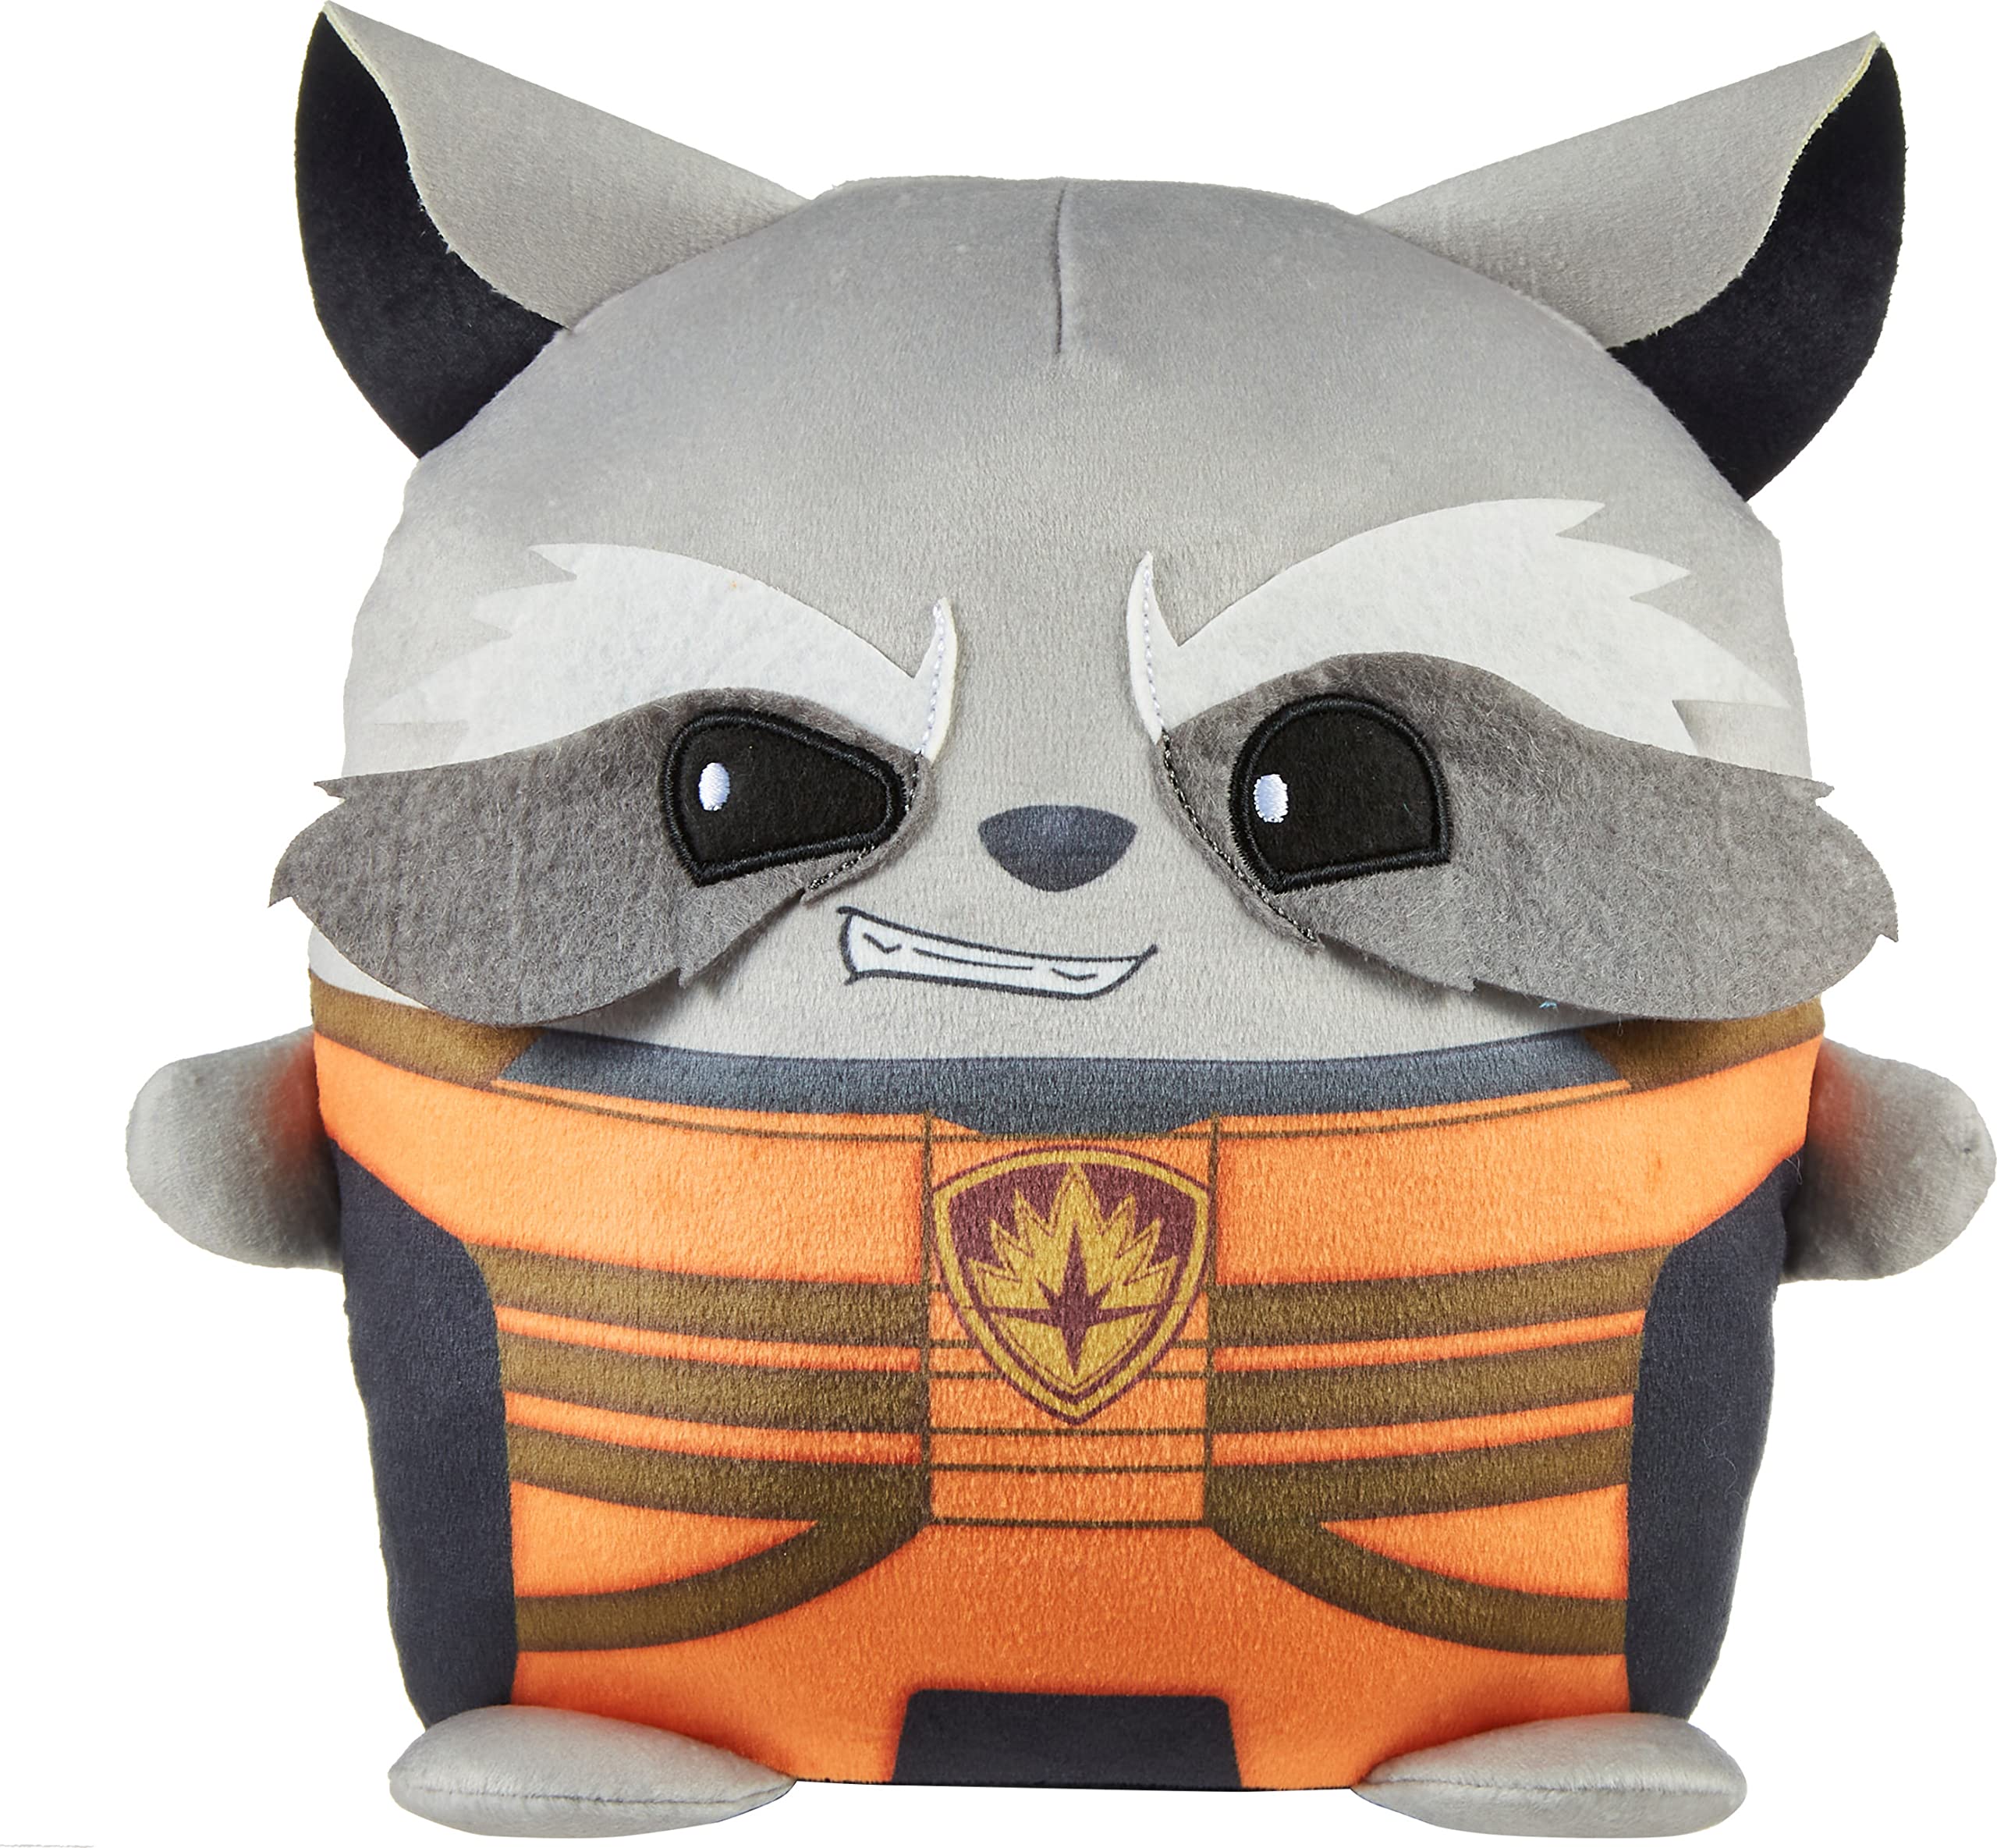 Mattel Marvel Cuutopia 10-inch Rocket Raccoon Plush Character, Super Hero Soft Rounded Pillow Doll, Collectible Toy Gift for Kids & Fans Ages 3 Years Old & Up